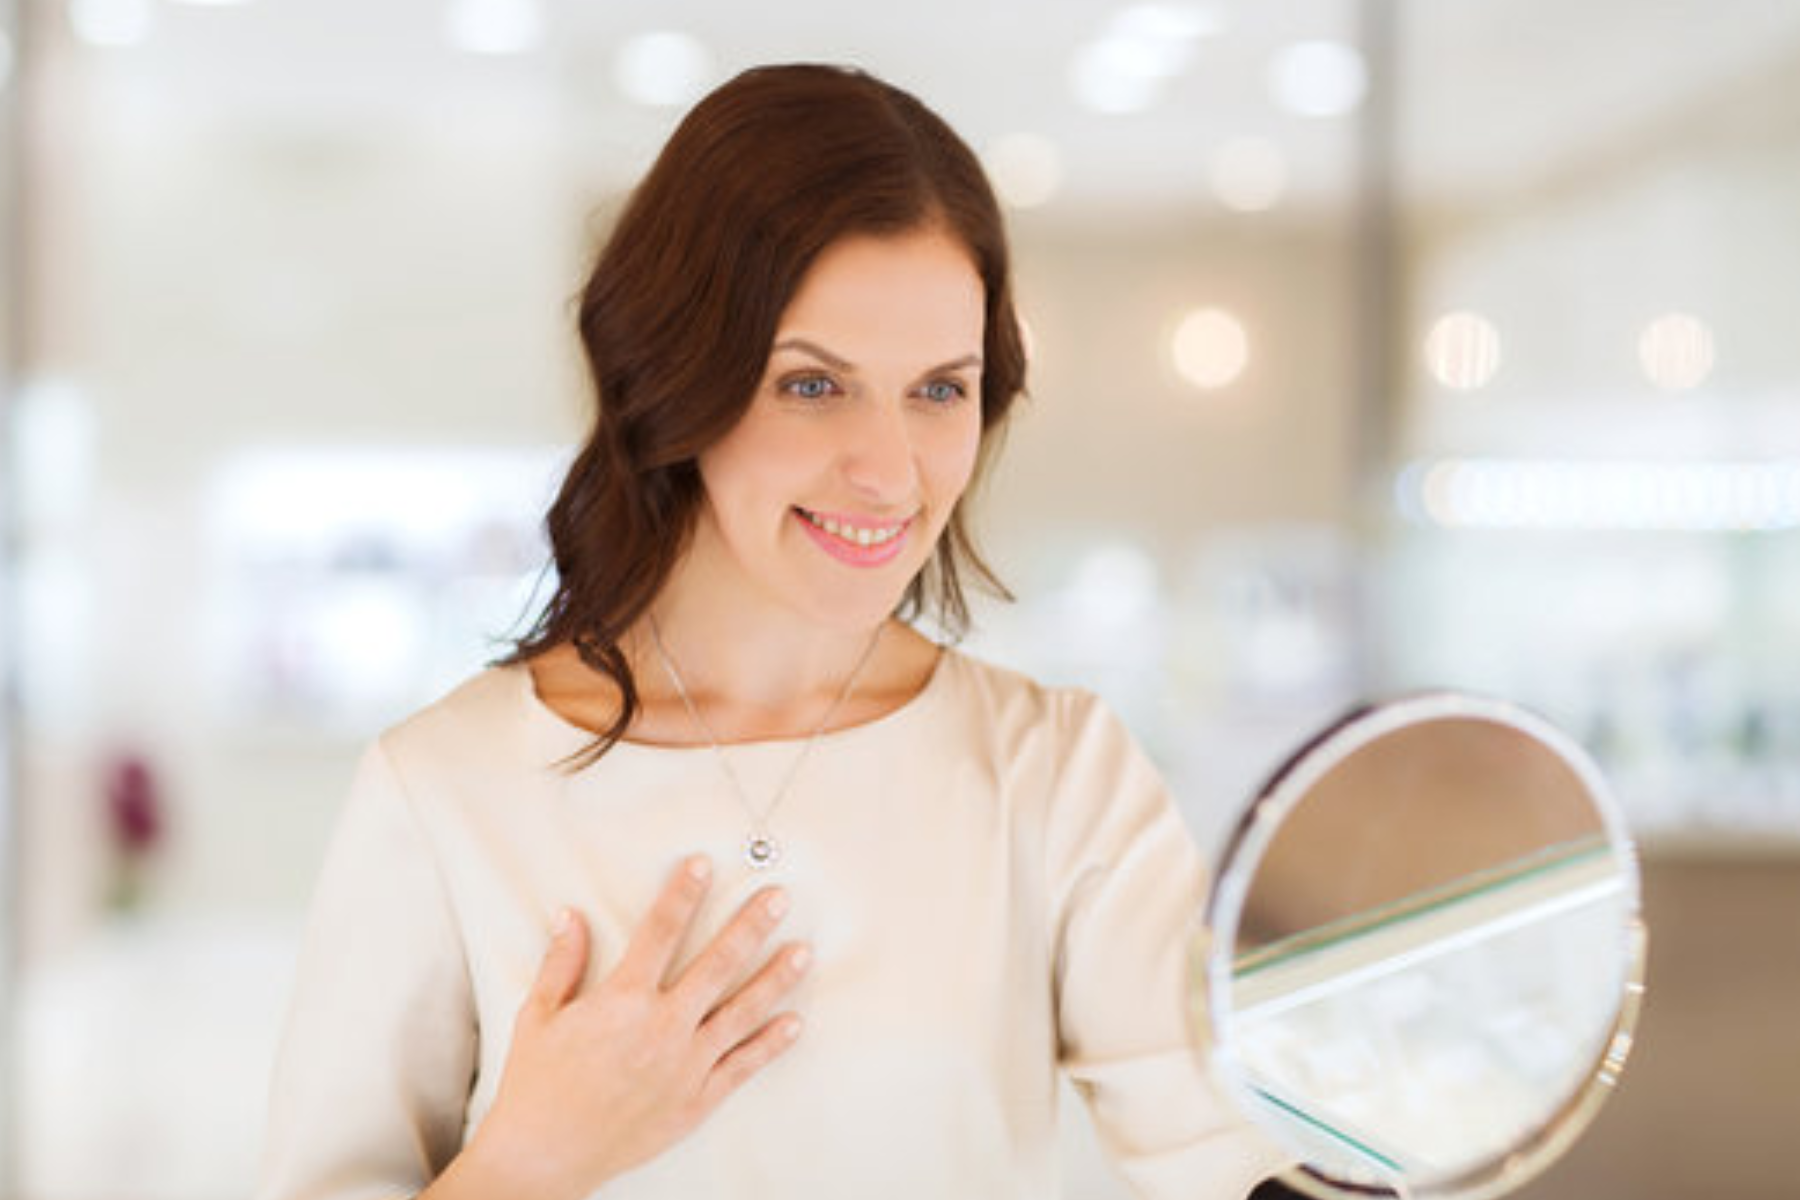 A female customer examines herself in a mirror inside a jewelry store